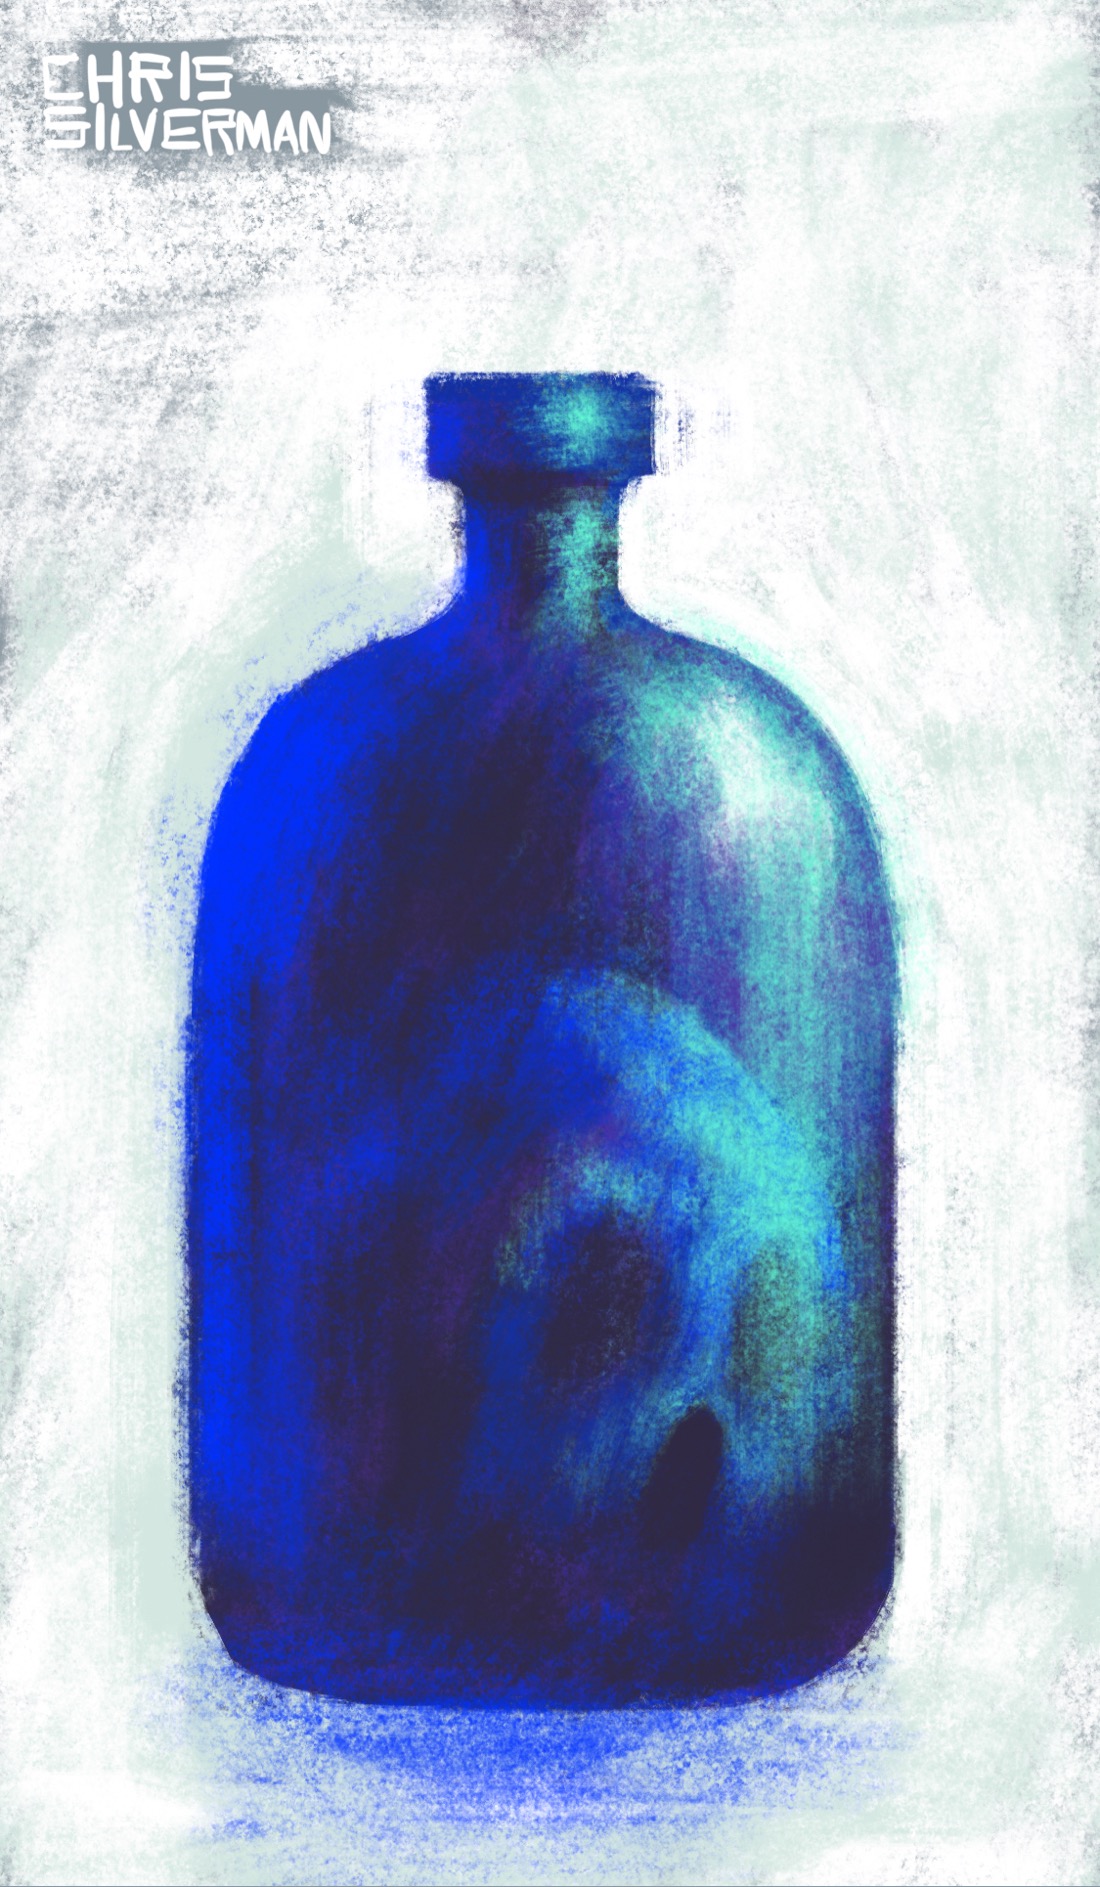 A large, blue jar with a short, narrow bottleneck, like a wine bottle if the bottle part expanded to about twice its size but the neck stayed the same. Inside the jar is a dimly visible skull. The light reflecting off the right side of the jar is an iridescent green. The left side of the jar has a blue sheen to it. The jar is set against a textured white background, casting a translucent blue shadow.